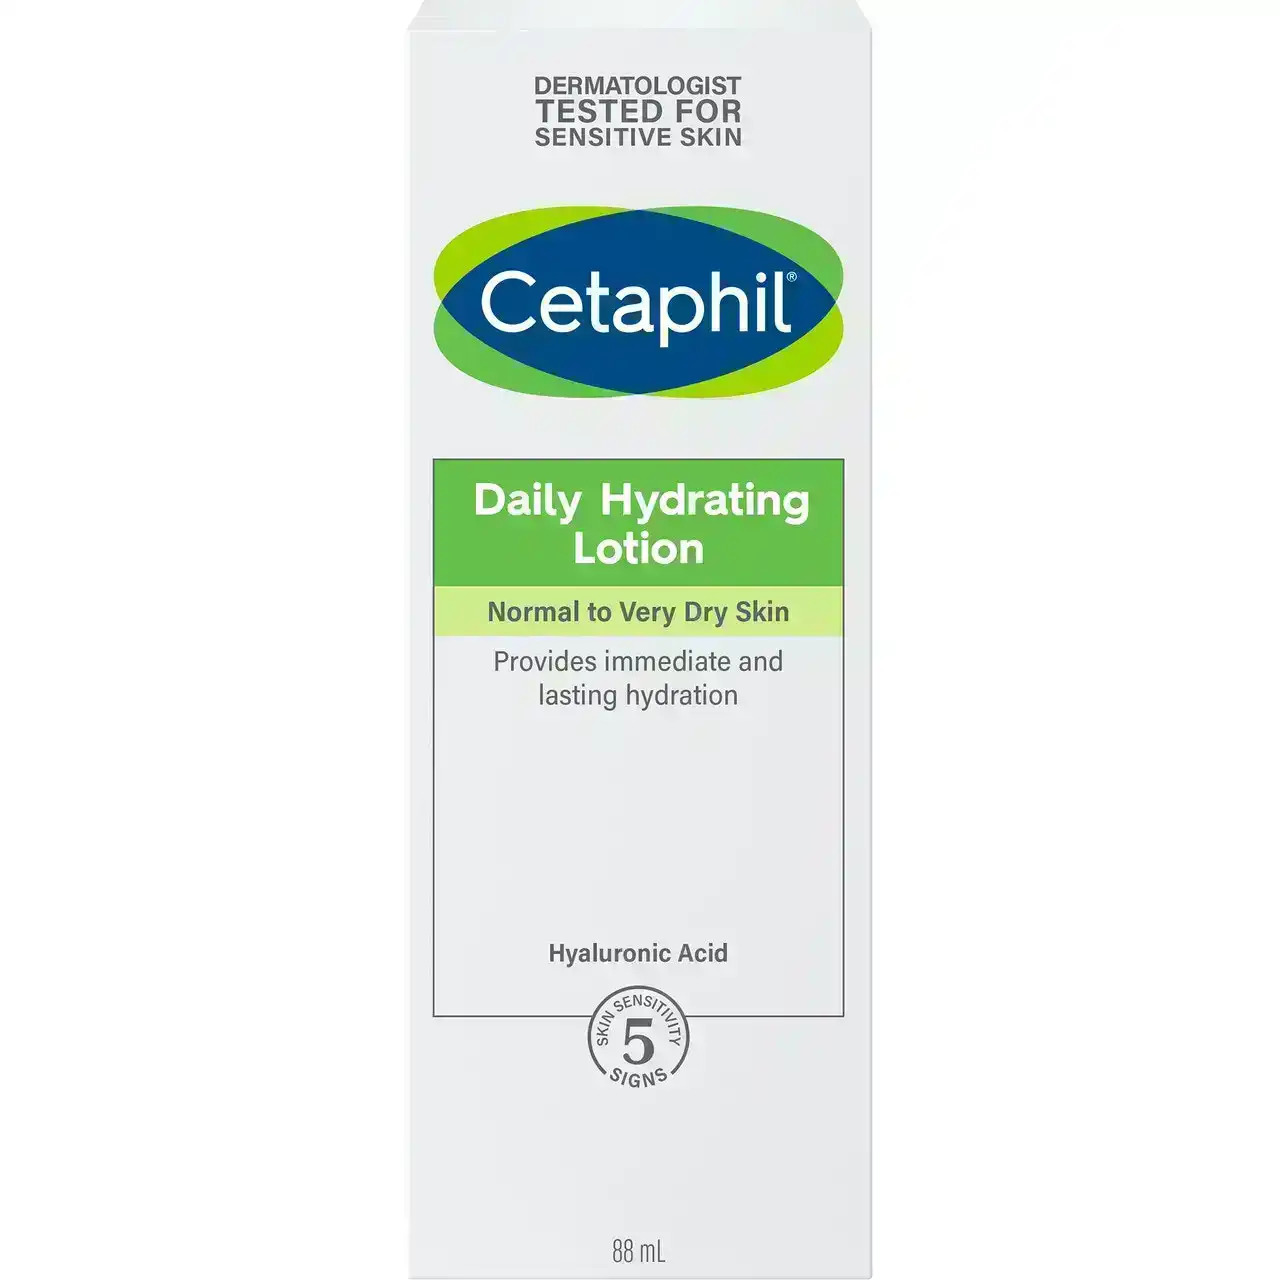 Cetaphil Daily Hydrating Lotion with Hyaluronic Acid